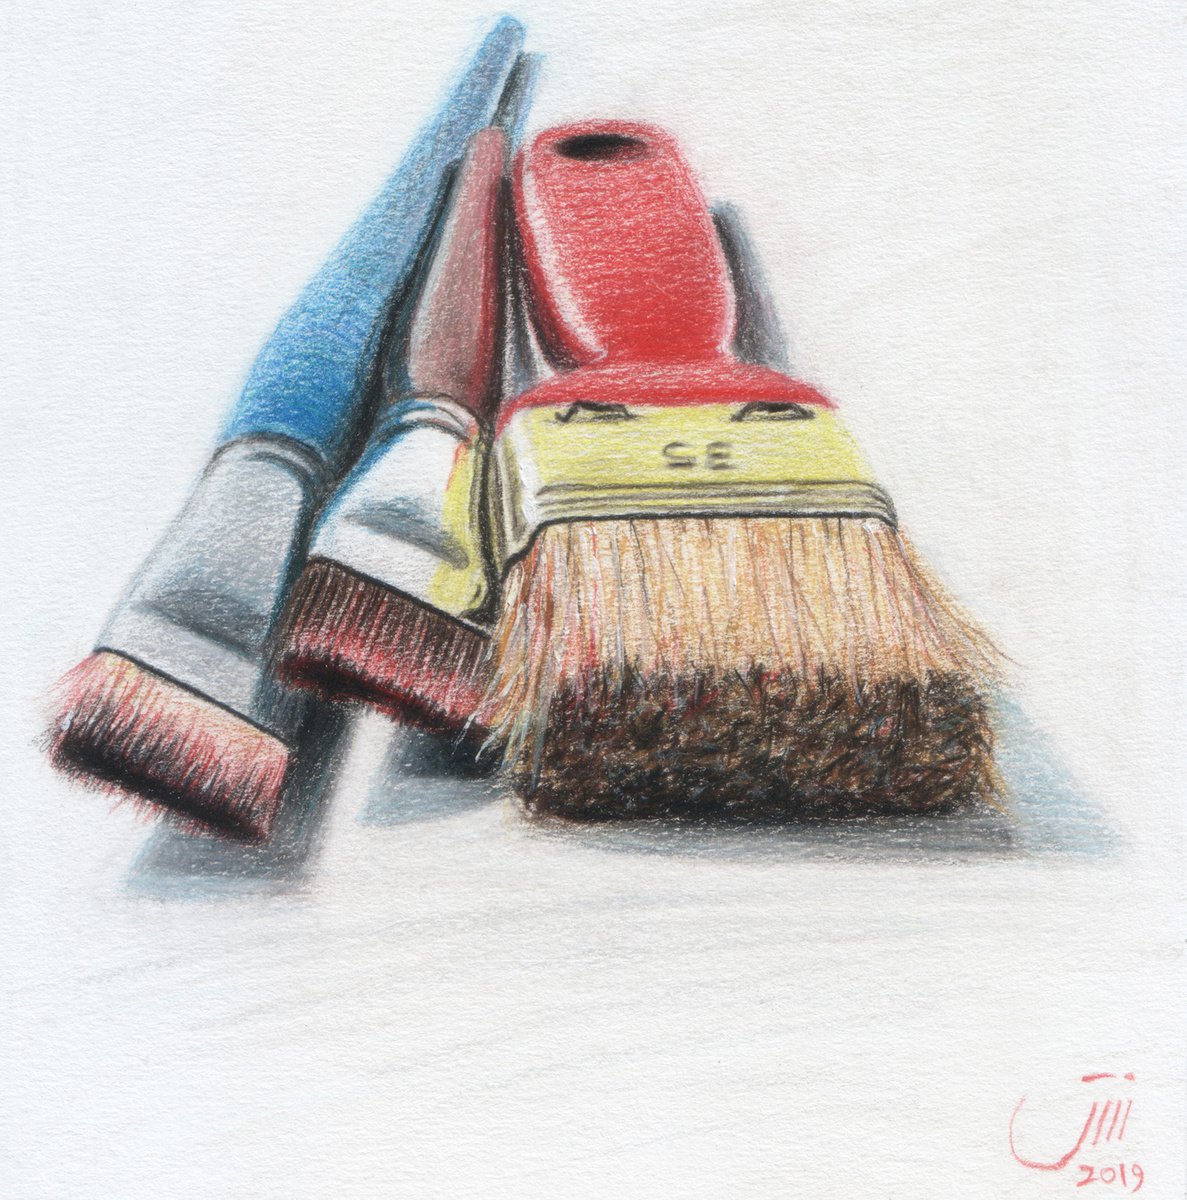 No.150, Light on Brushes by sedigheh zoghi